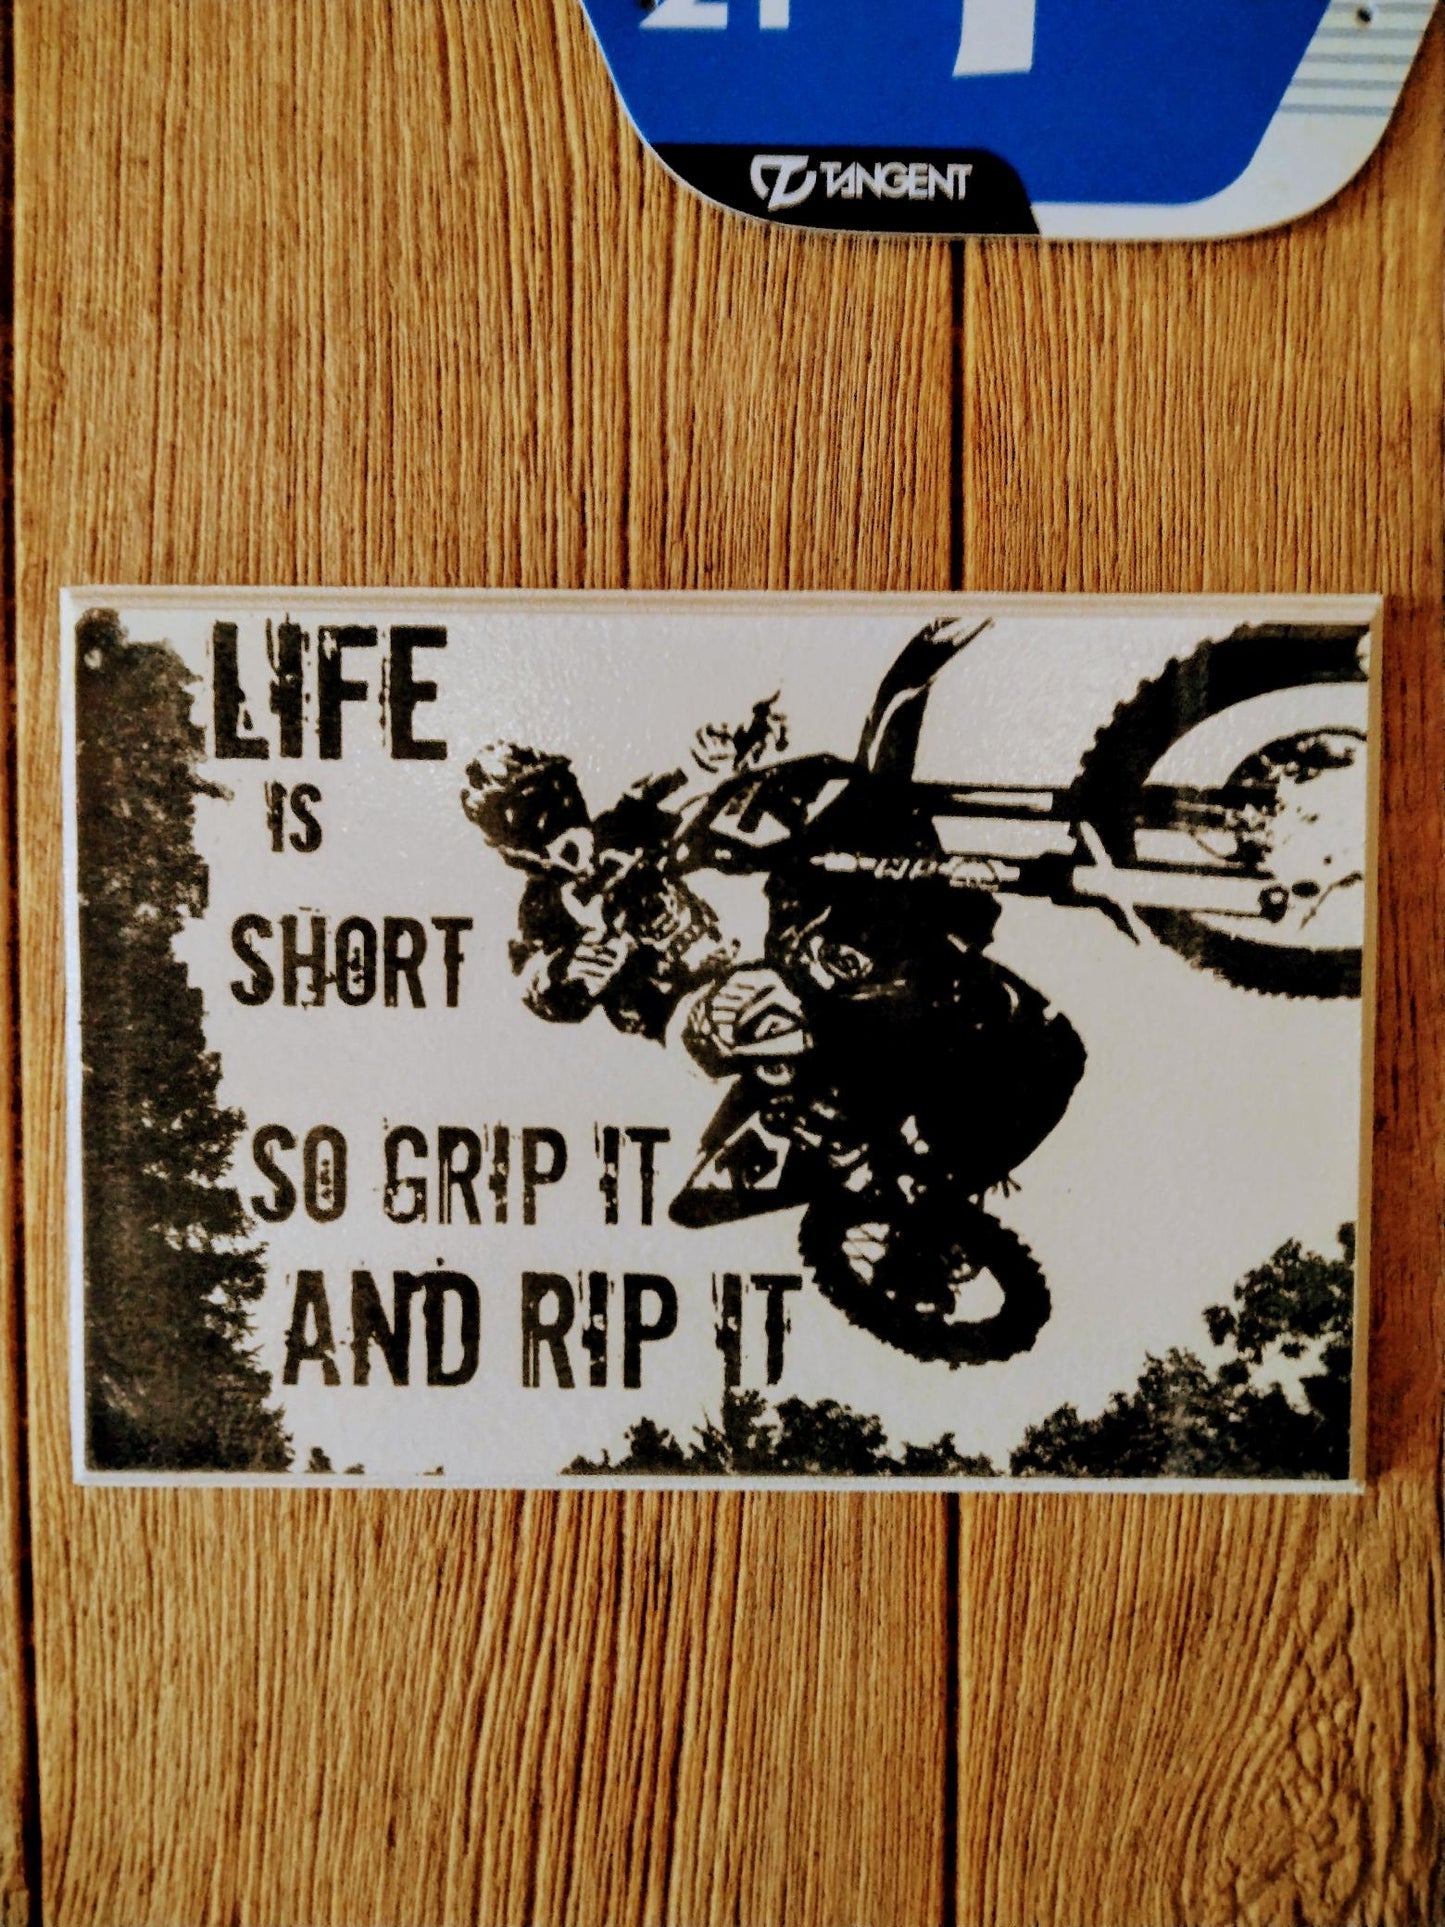 Motocross Motivation The Gifts For Dirt Bike Riders - Main